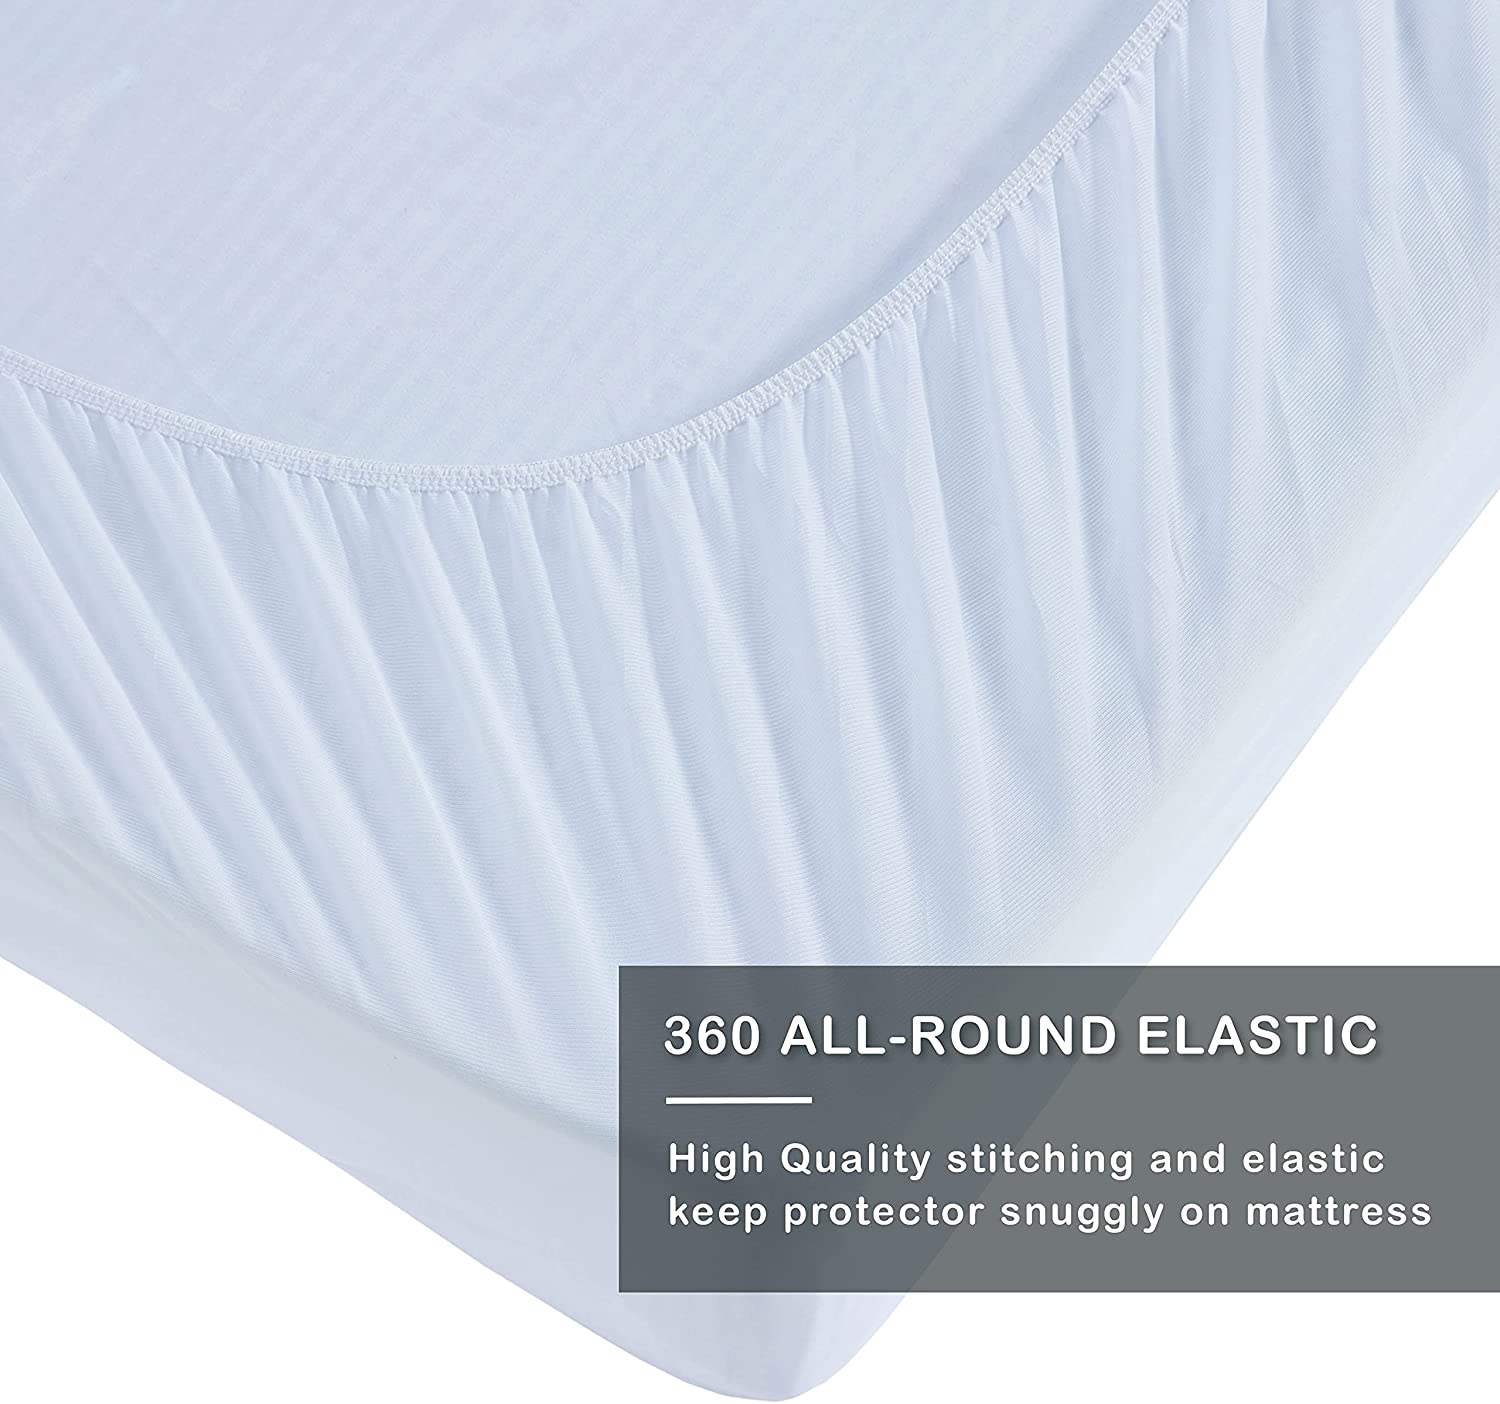 Degrees of Comfort Premium Soft Waterproof Mattress Pad King Size | Quilted Topper Fitted 15'' Inch Deep Pocket 3M Scotchgard Stain Resistant Protector Cover | Cooling, Washable, Breathable